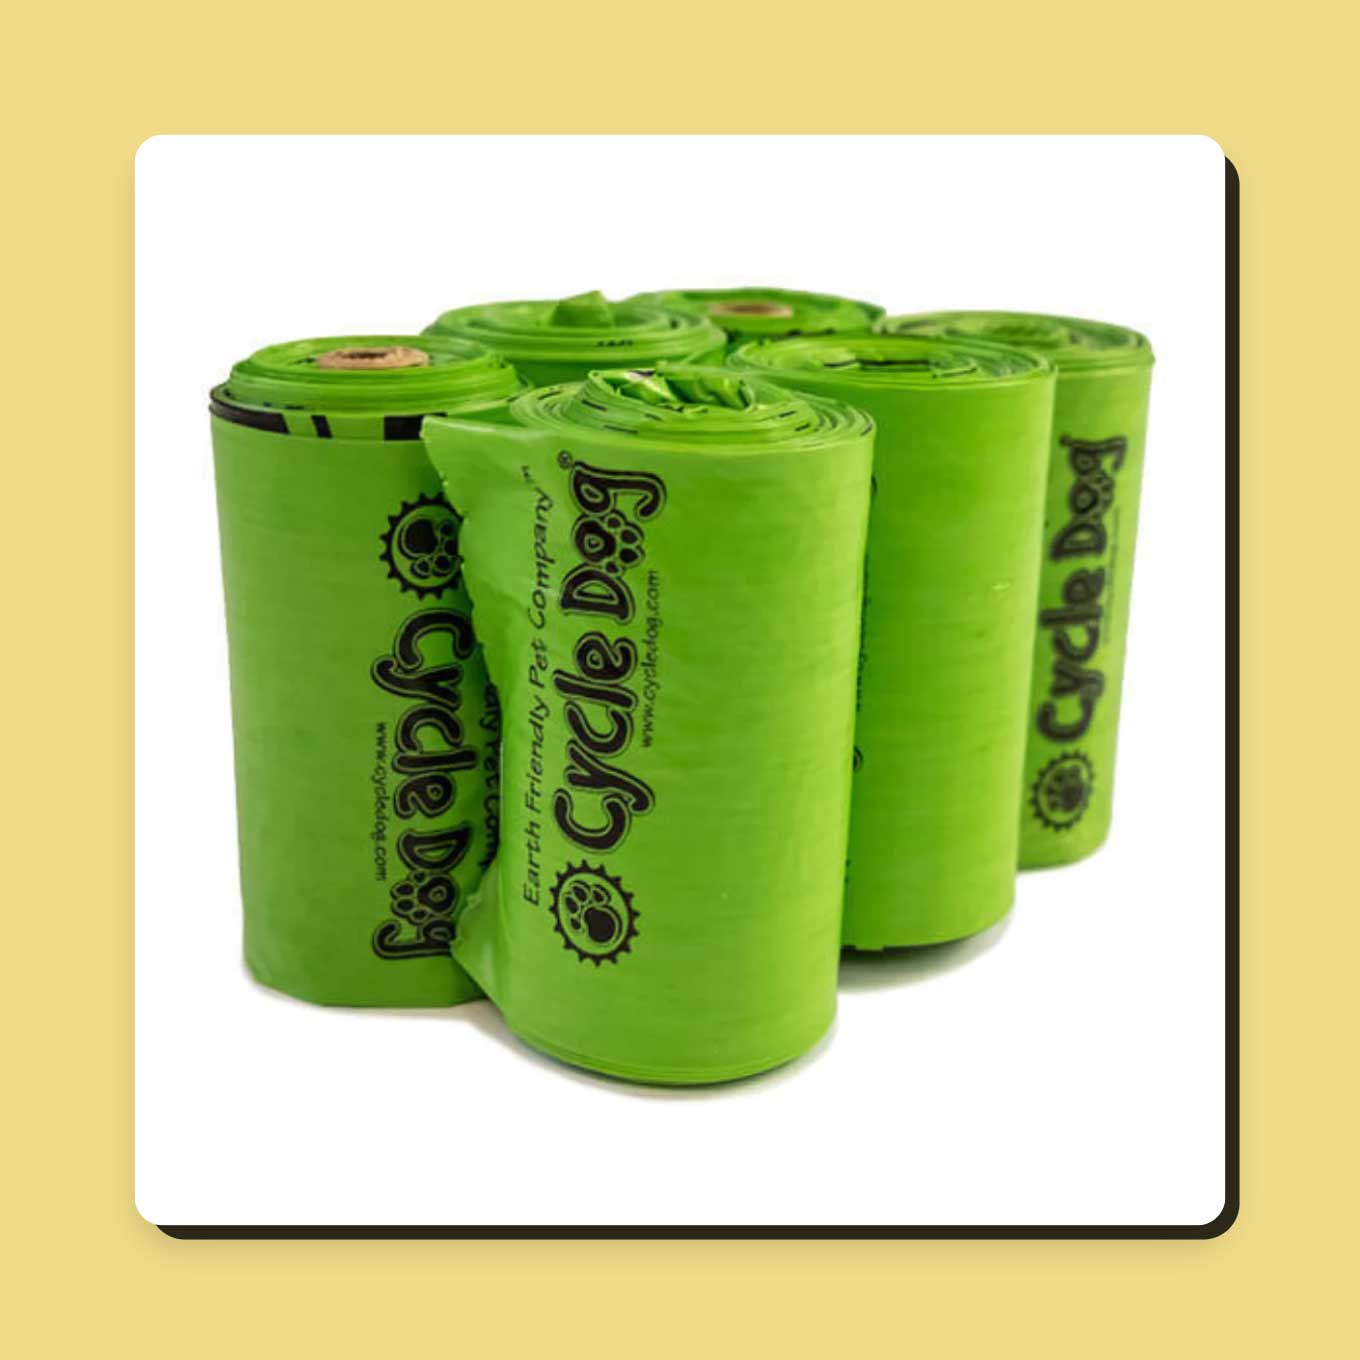 Rolls of green Cycle Dog poo bags